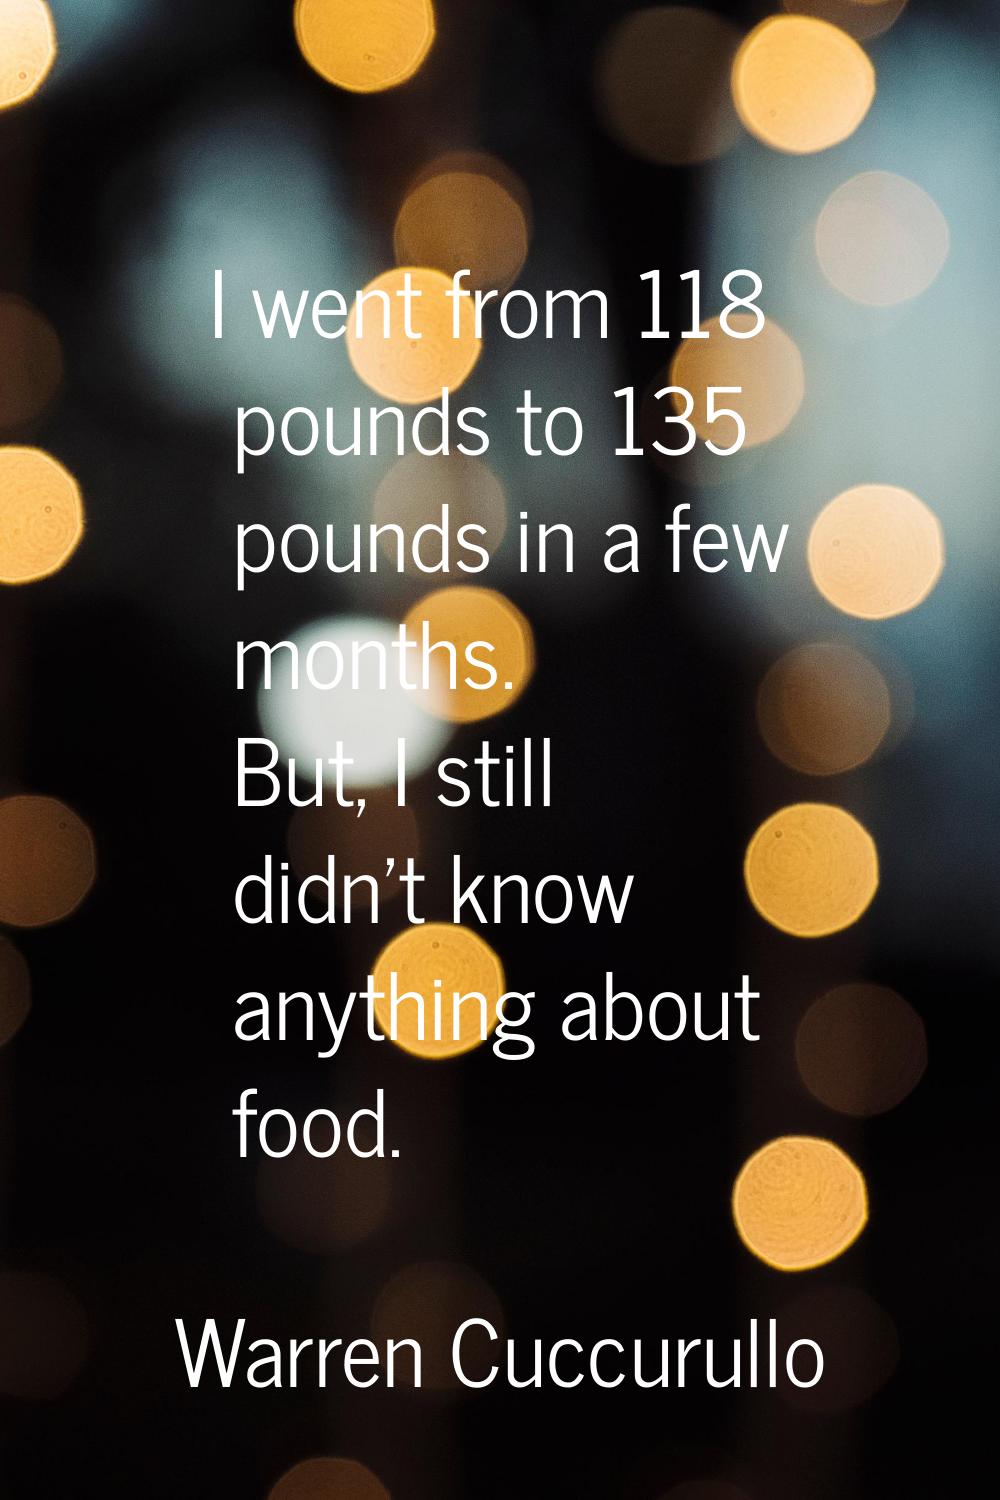 I went from 118 pounds to 135 pounds in a few months. But, I still didn't know anything about food.